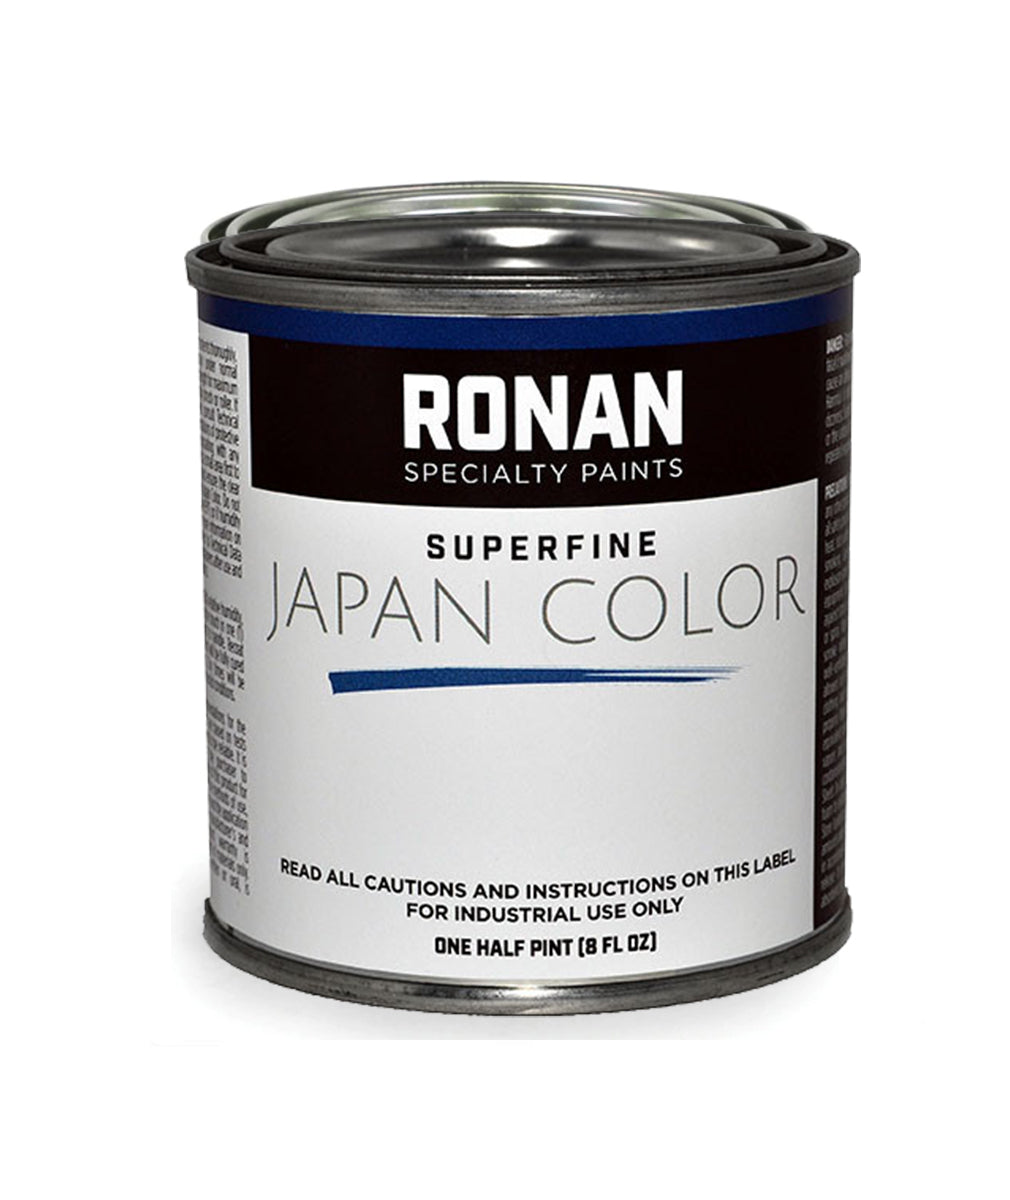 Ronan Japan Colors, available at Clement's Paint in Austin, TX.